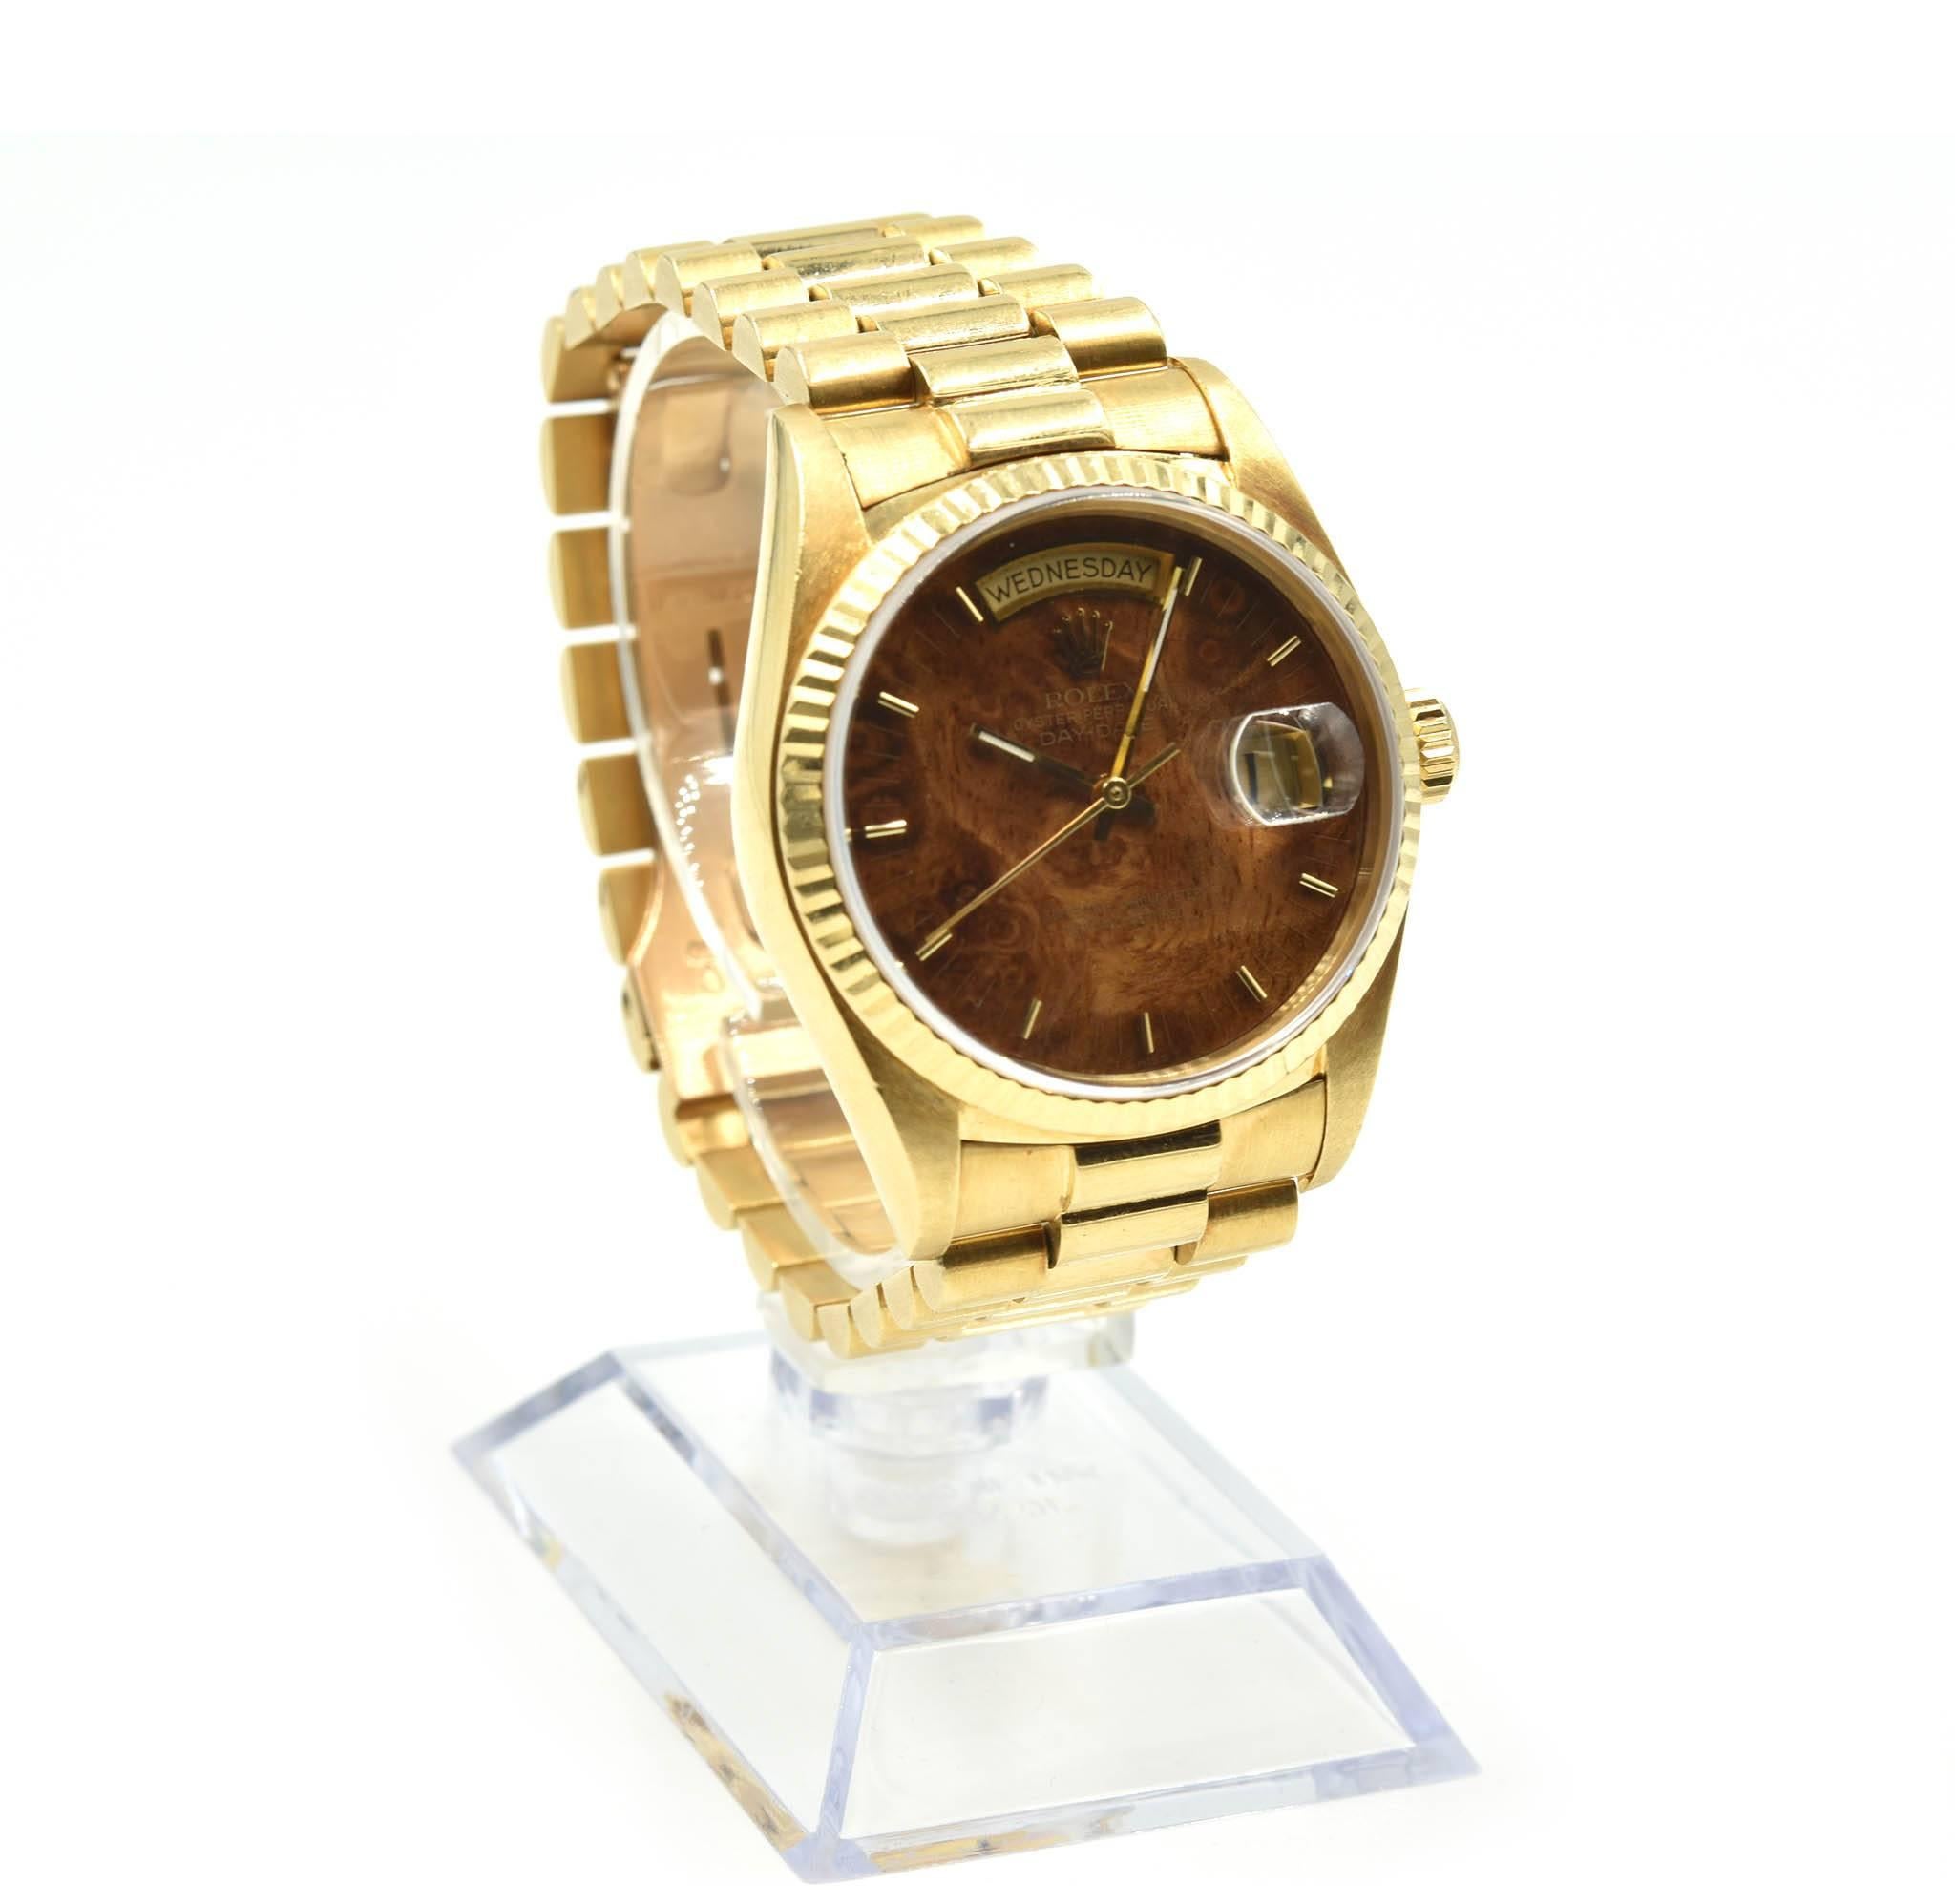 Movement: automatic 3055 movement w/ quickset feature
Function: hours, minutes, seconds, day, date
Case: 36mm round 18k yellow gold case with 18k yellow gold fluted bezel, sapphire protective crystal, screw-down crown, water resistant to 100